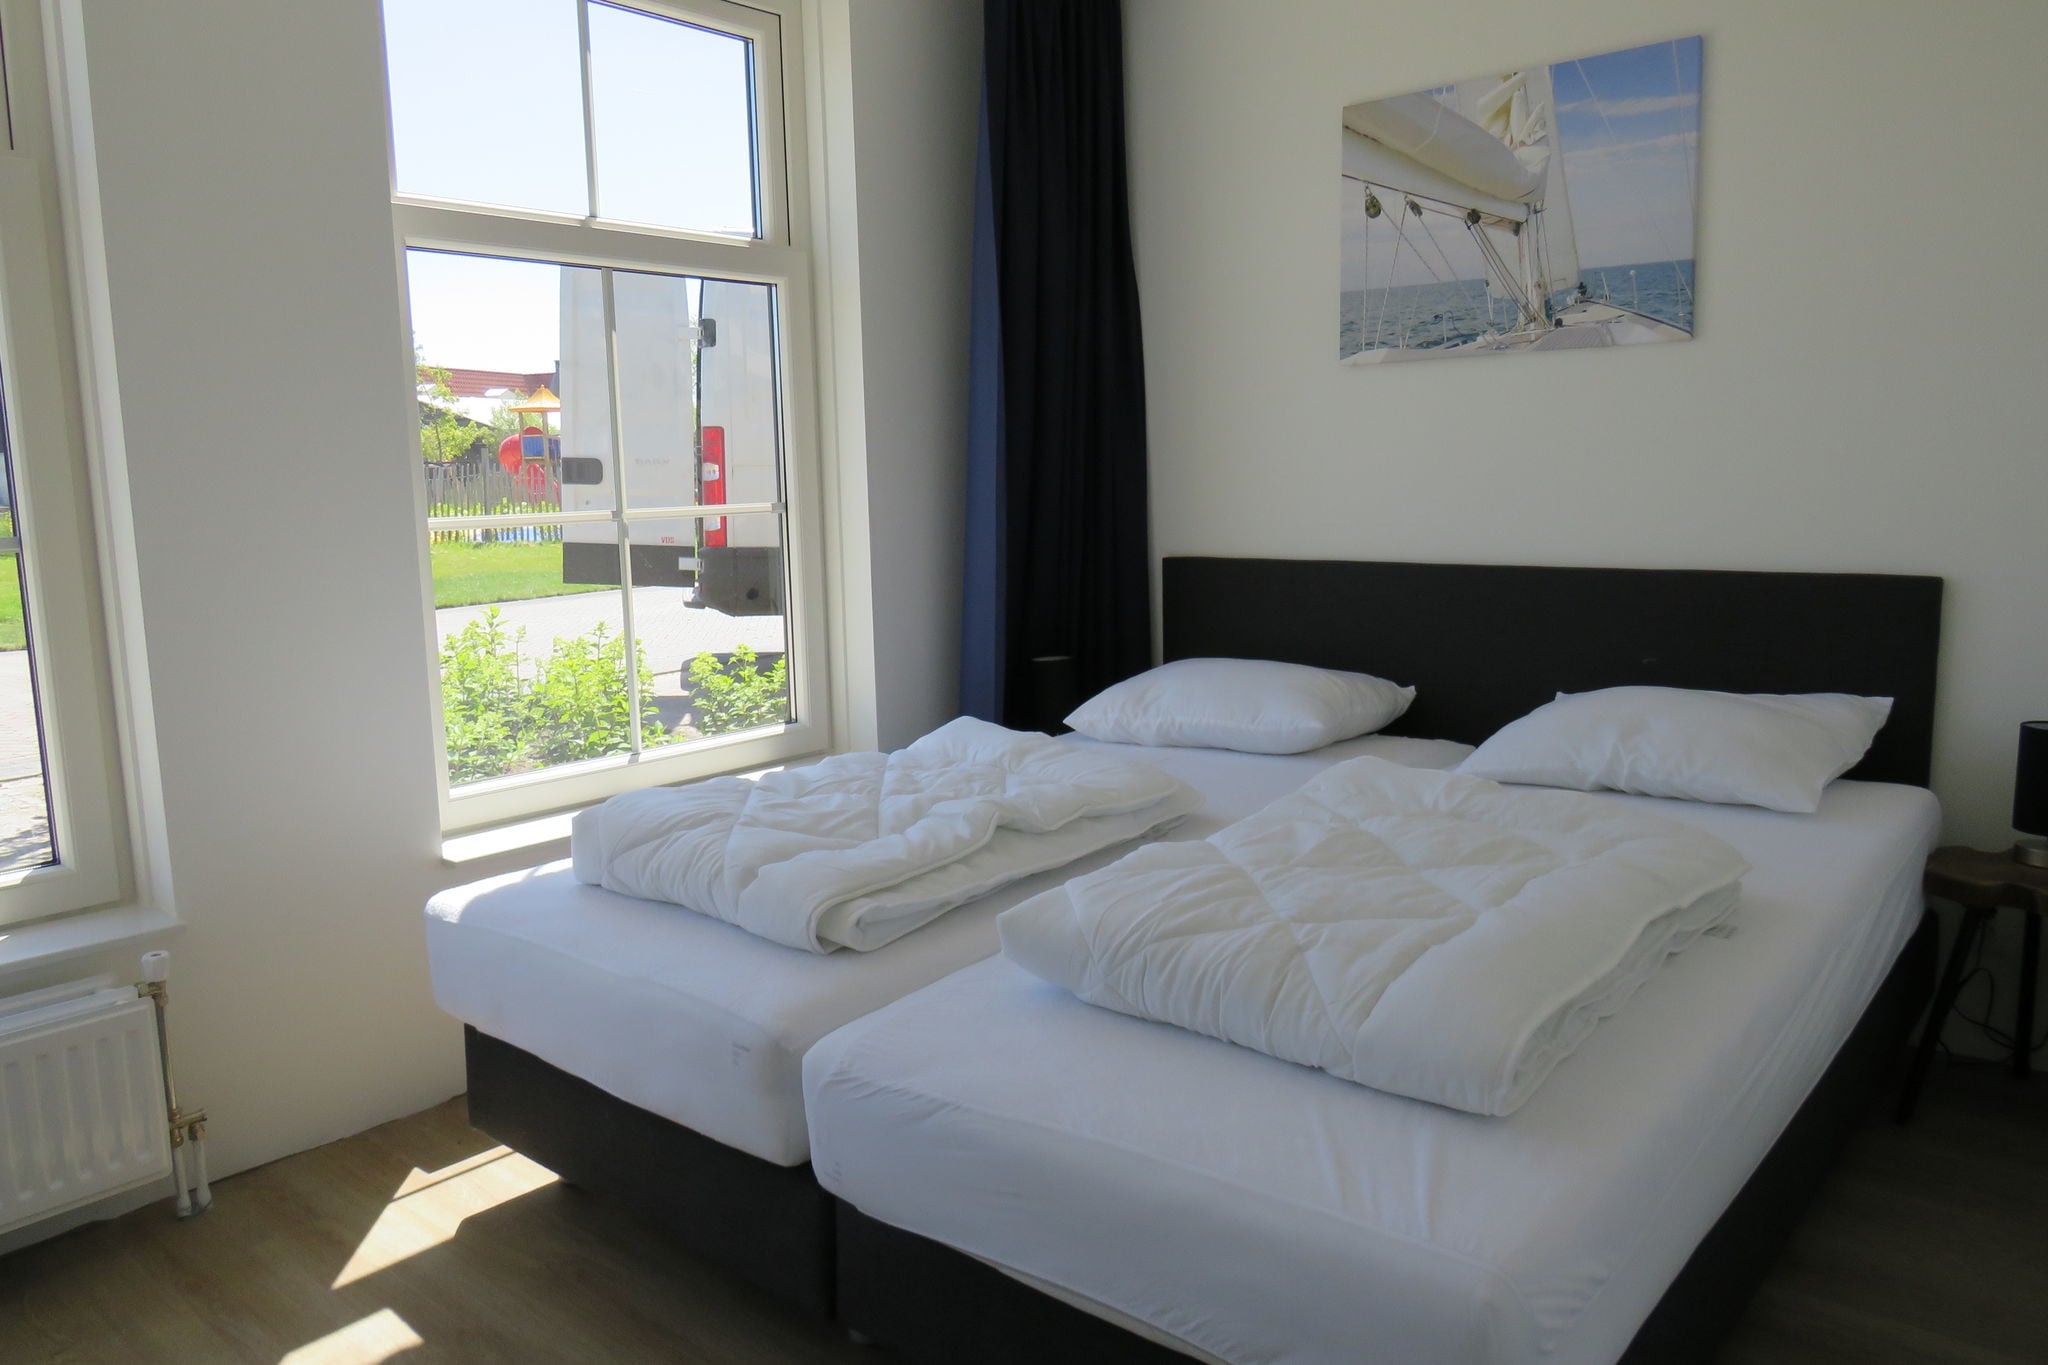 Nice holiday home on the Markermeer not far from Amsterdam